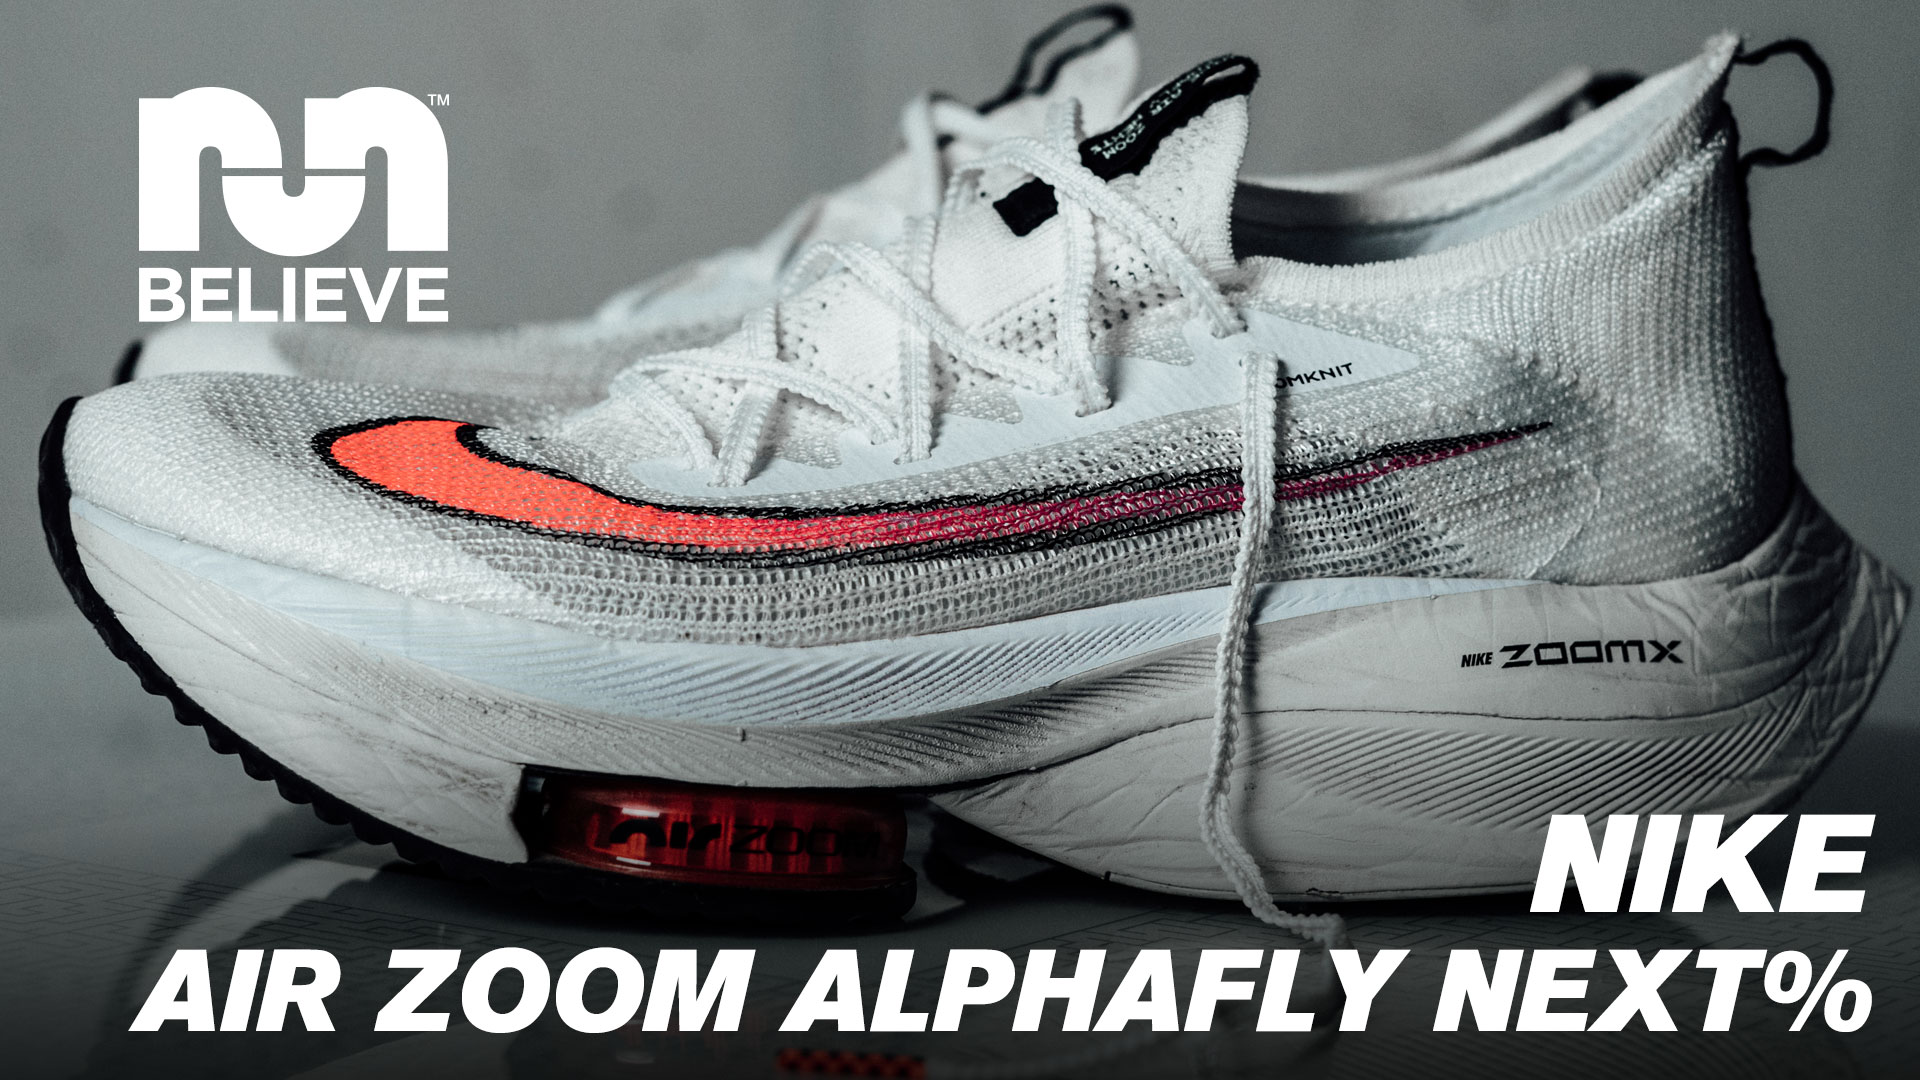 nike alphafly review